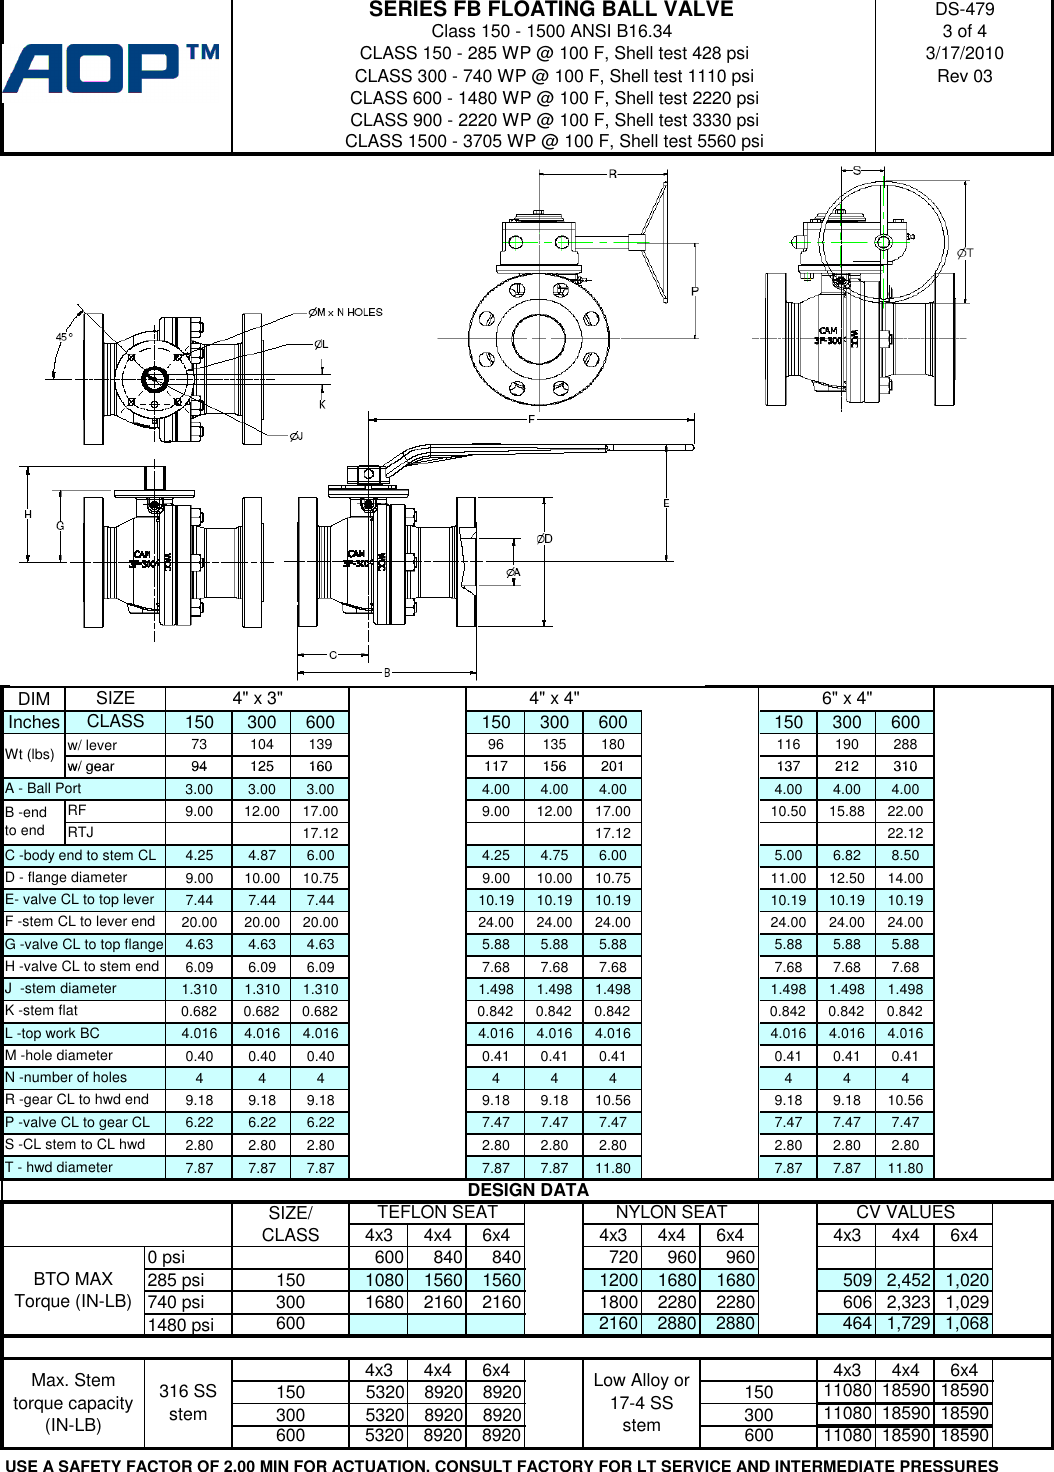 Page 3 of 4 - FB-DS-479-REV-03 AOP Series FB Floating Ball Valve Technical Drawing Aop-fb-technical-drawing